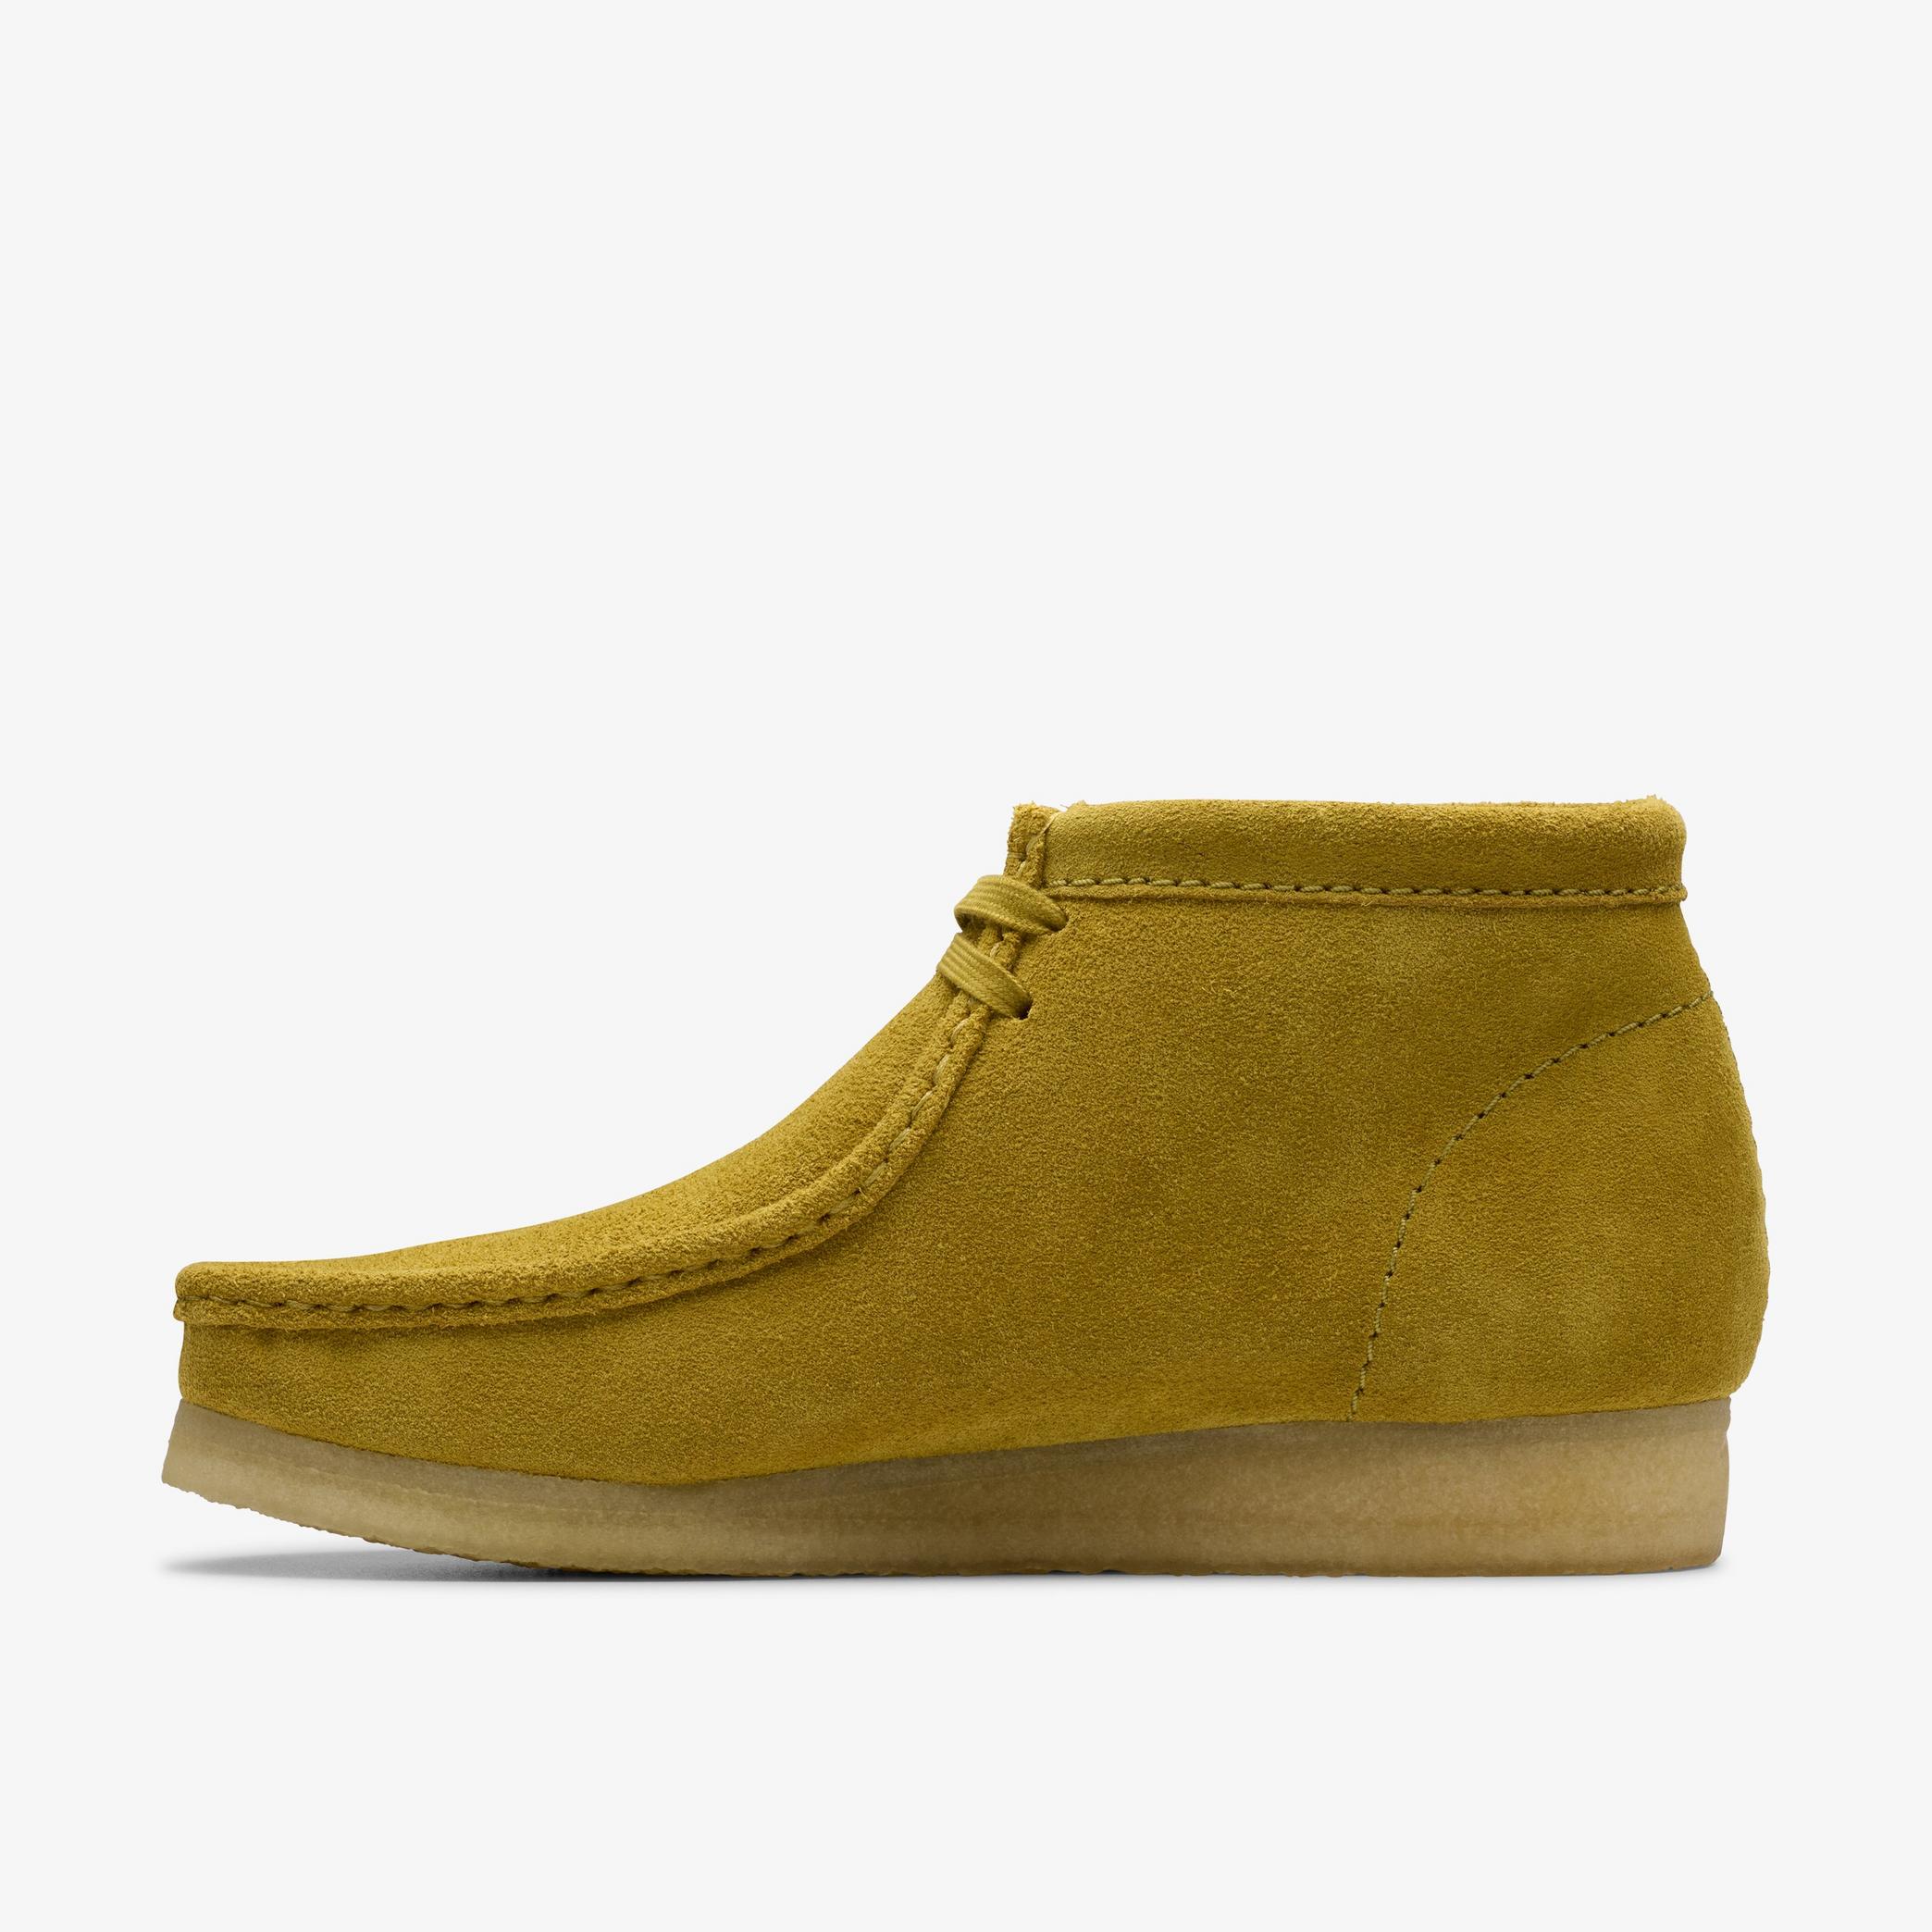 Wallabee Boot Olive Suede Wallabee, view 2 of 7